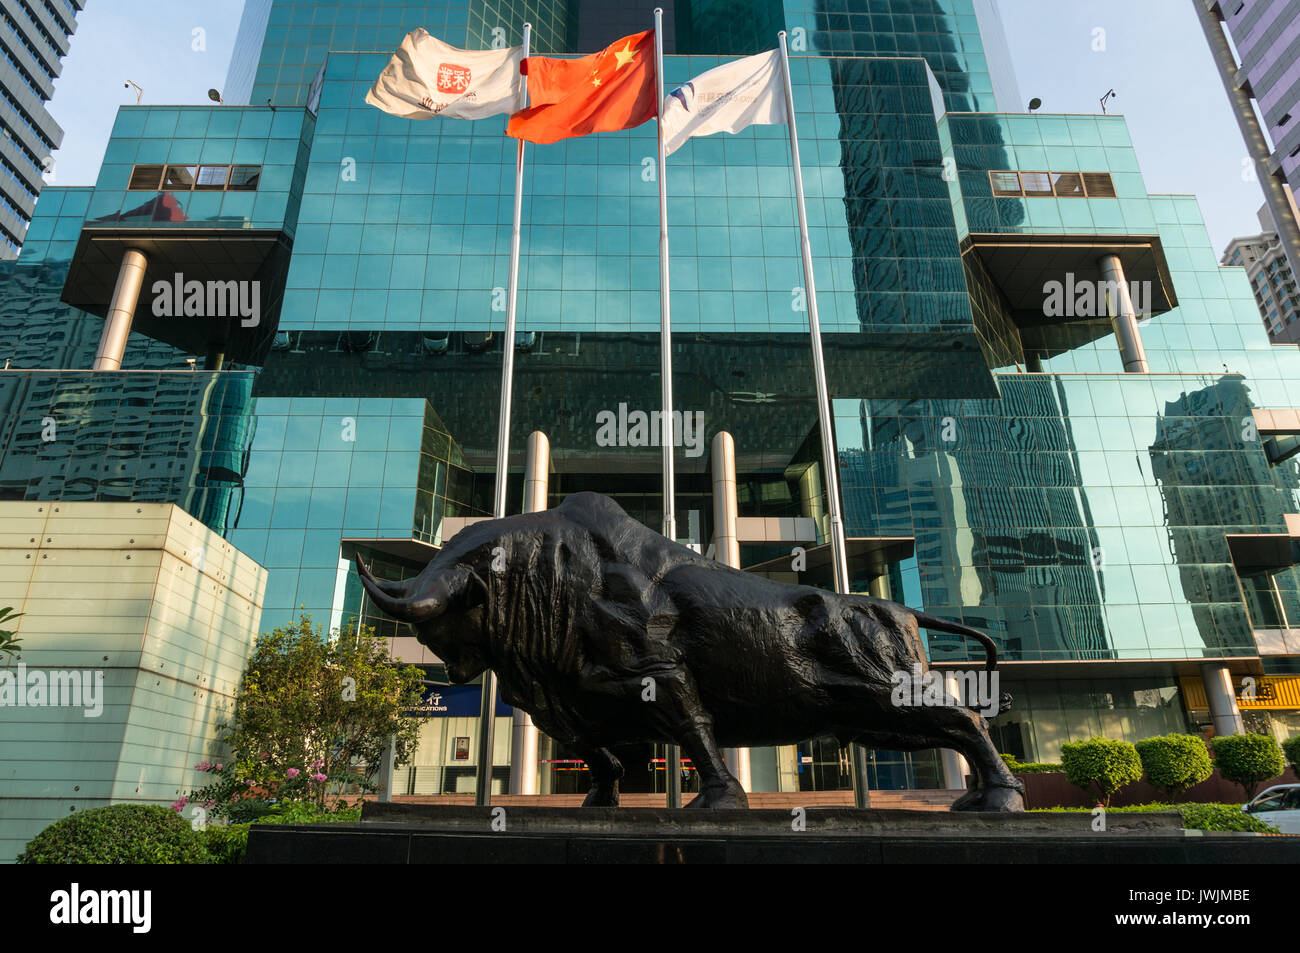 Bull statue outside of Shenzhen Stock Exchange, a major stock market in China, in Shenzhen, Guangdong province, China Stock Photo